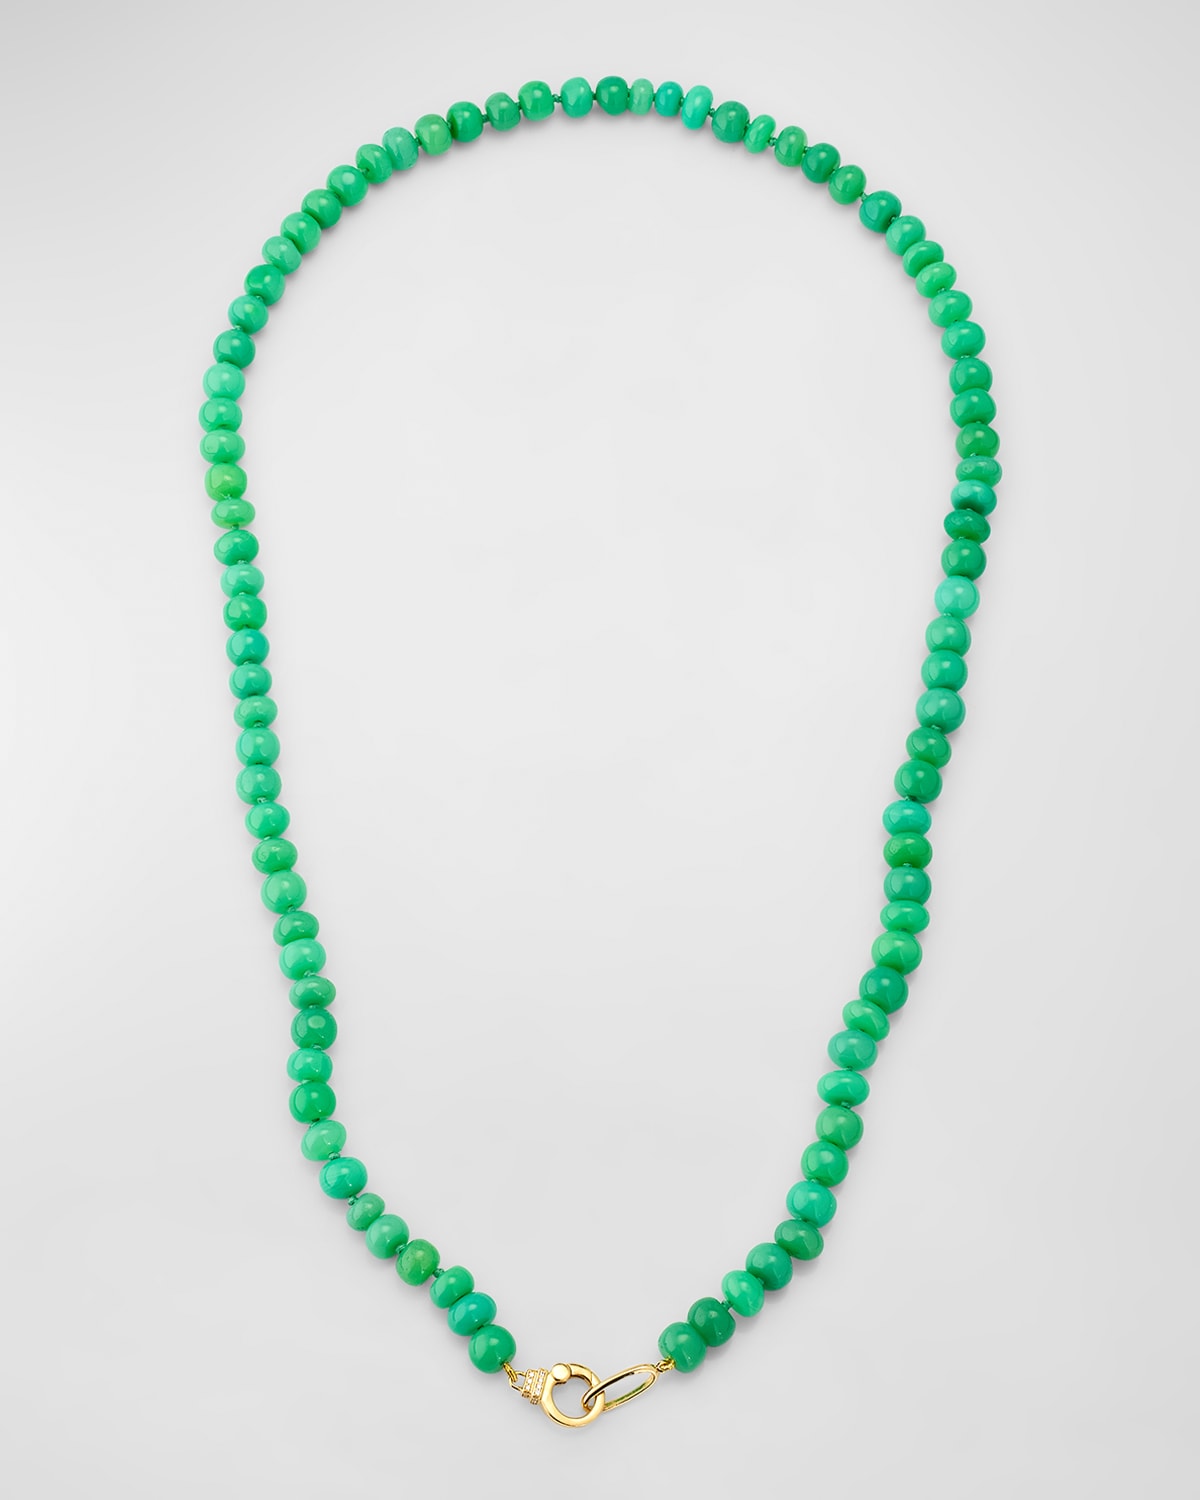 18K Yellow Gold 6mm Chrysoprase Rondelle Necklace with Small Diamond Clasp, 22"L